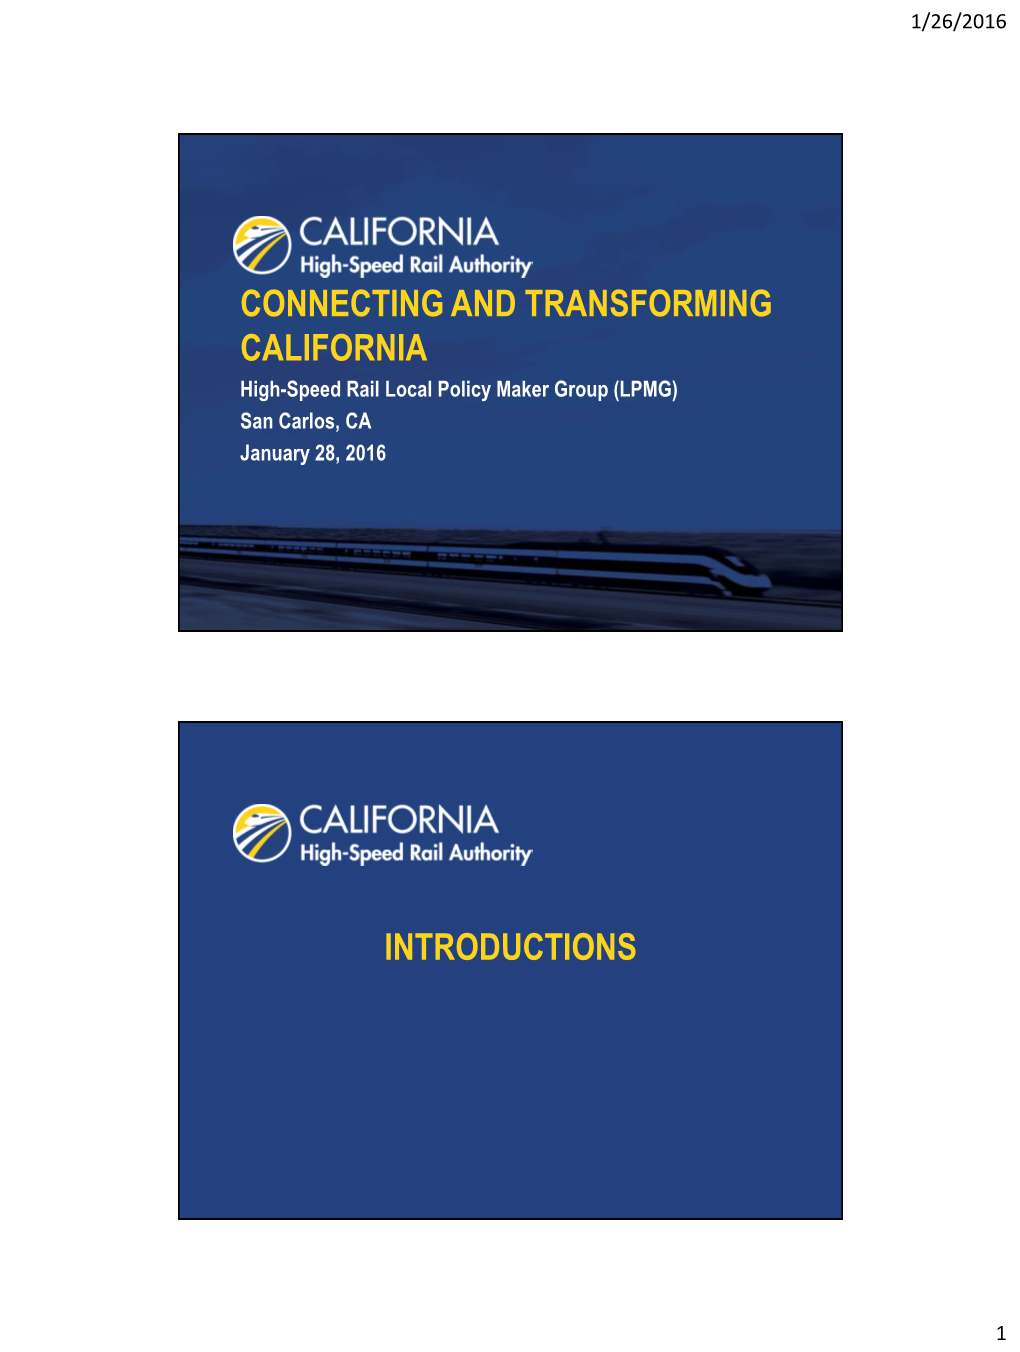 Connecting and Transforming California Introductions